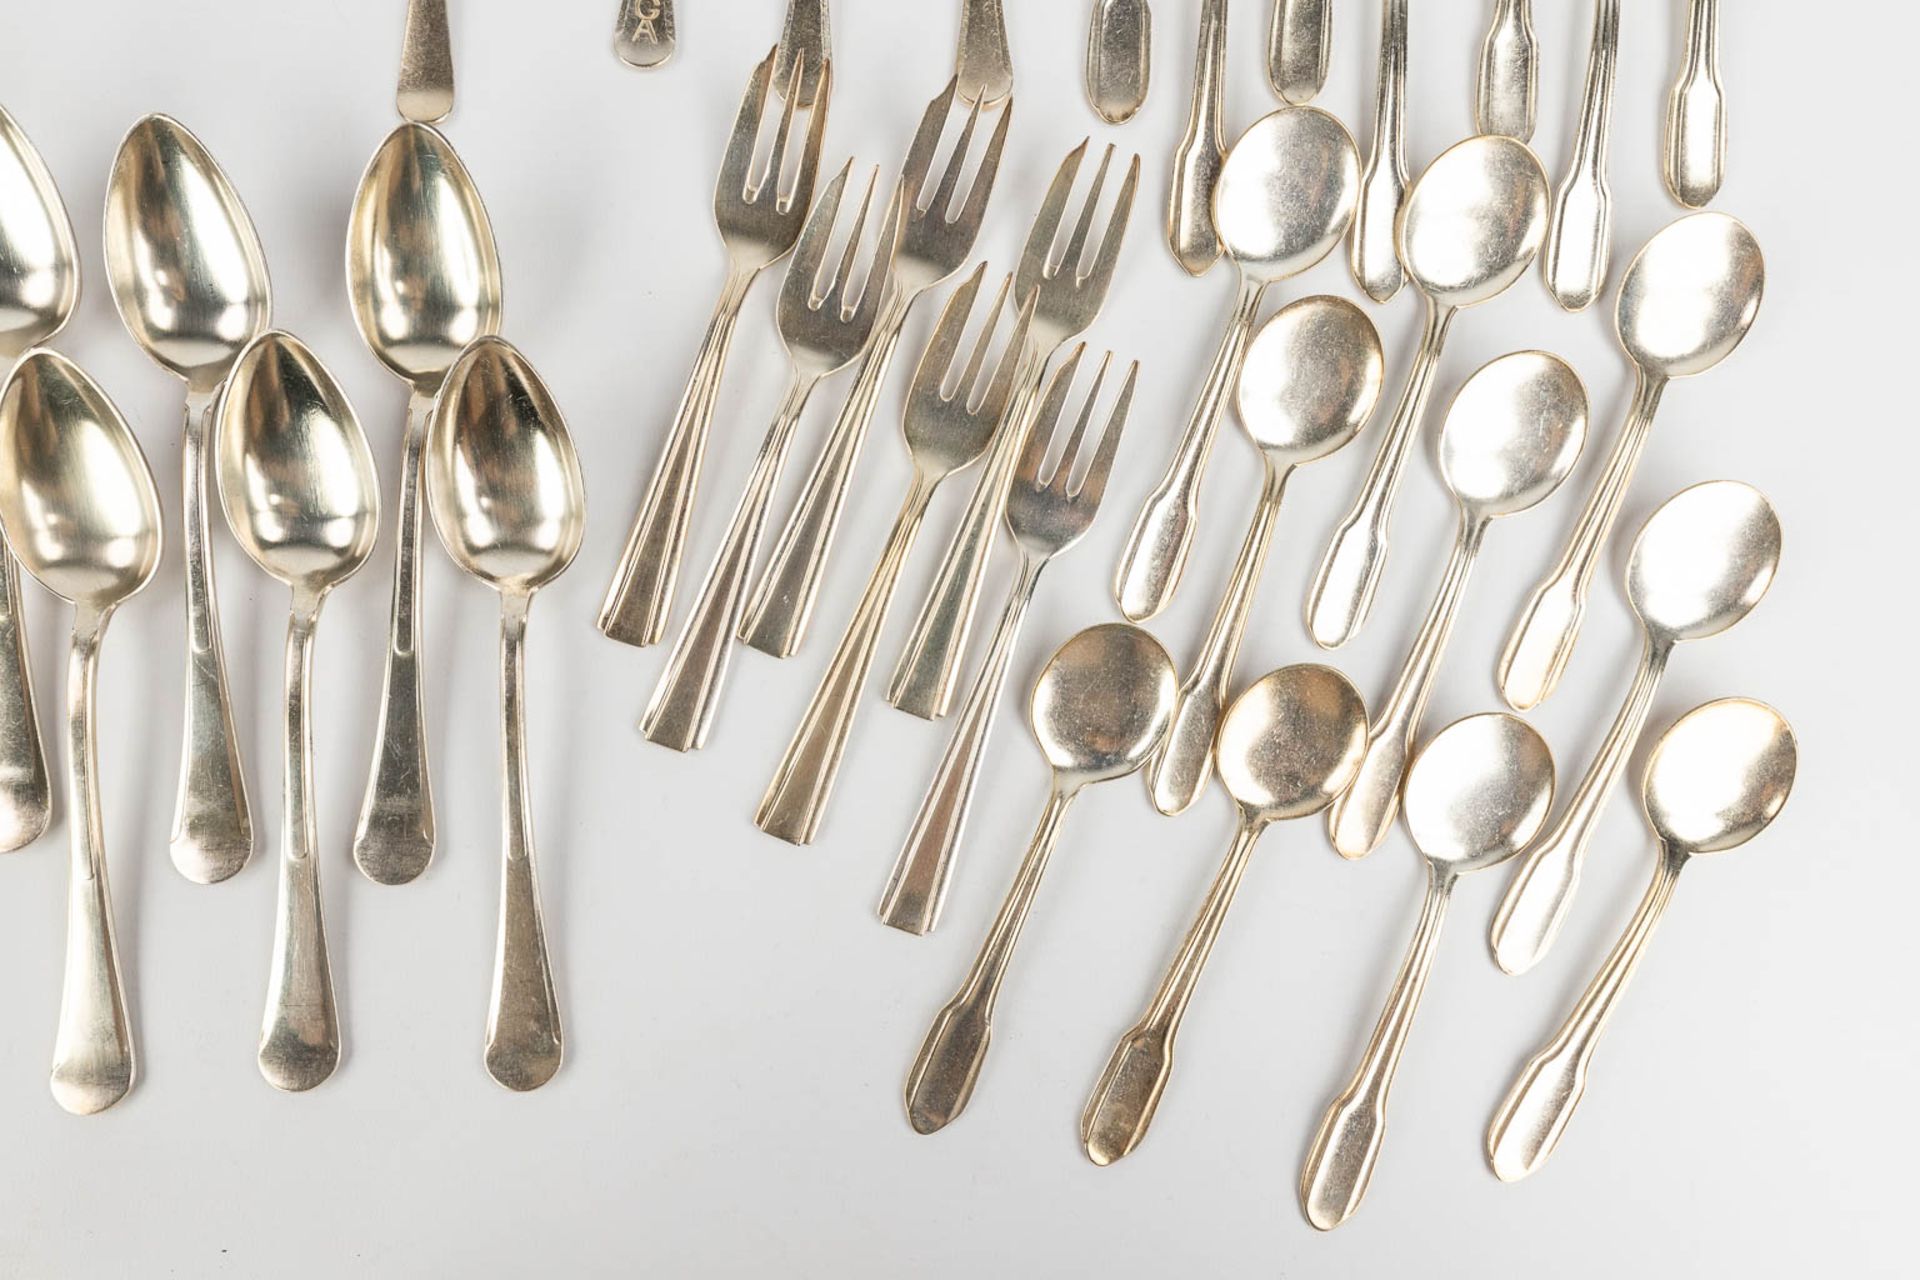 A large collection of cutlery and table accessories made of silver-plated metal. - Image 11 of 12